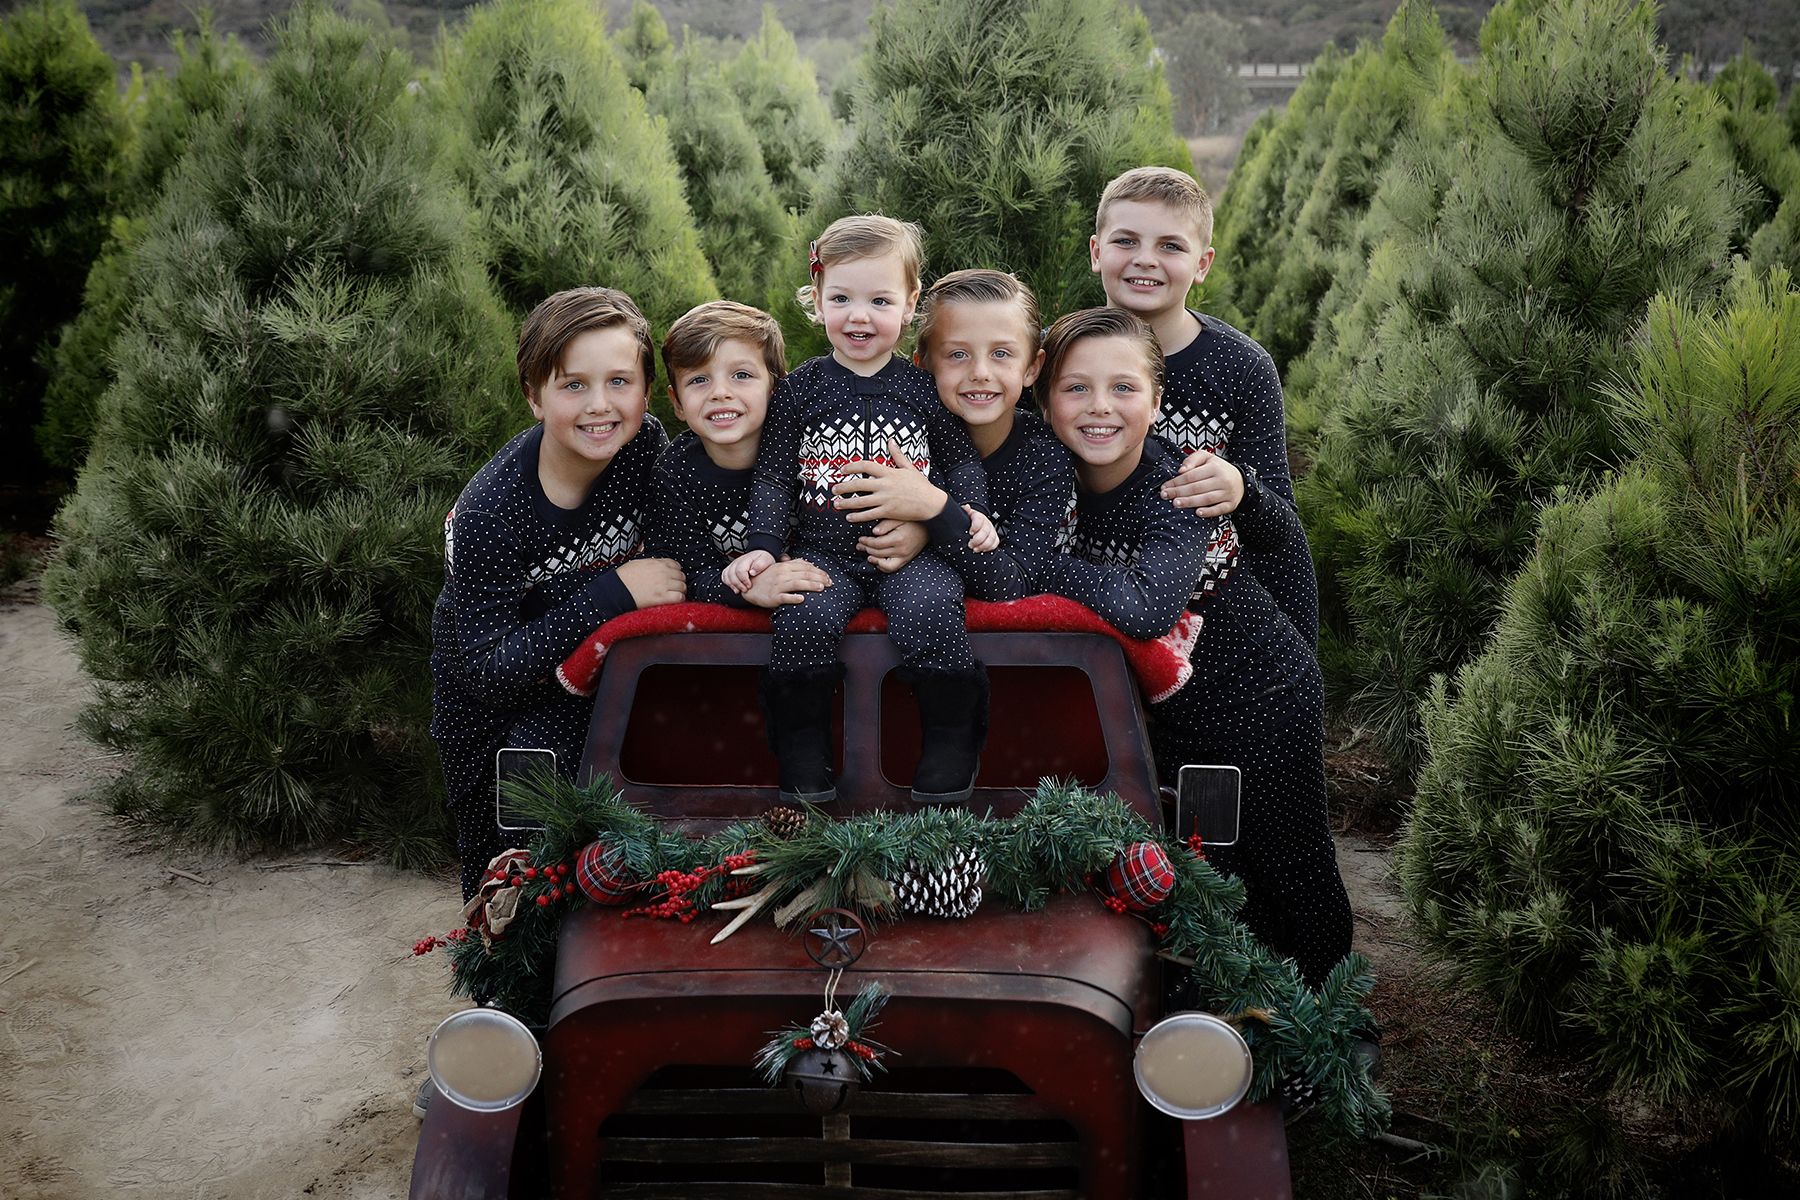 Large extended family photographers dallas | Paige Walker Photography